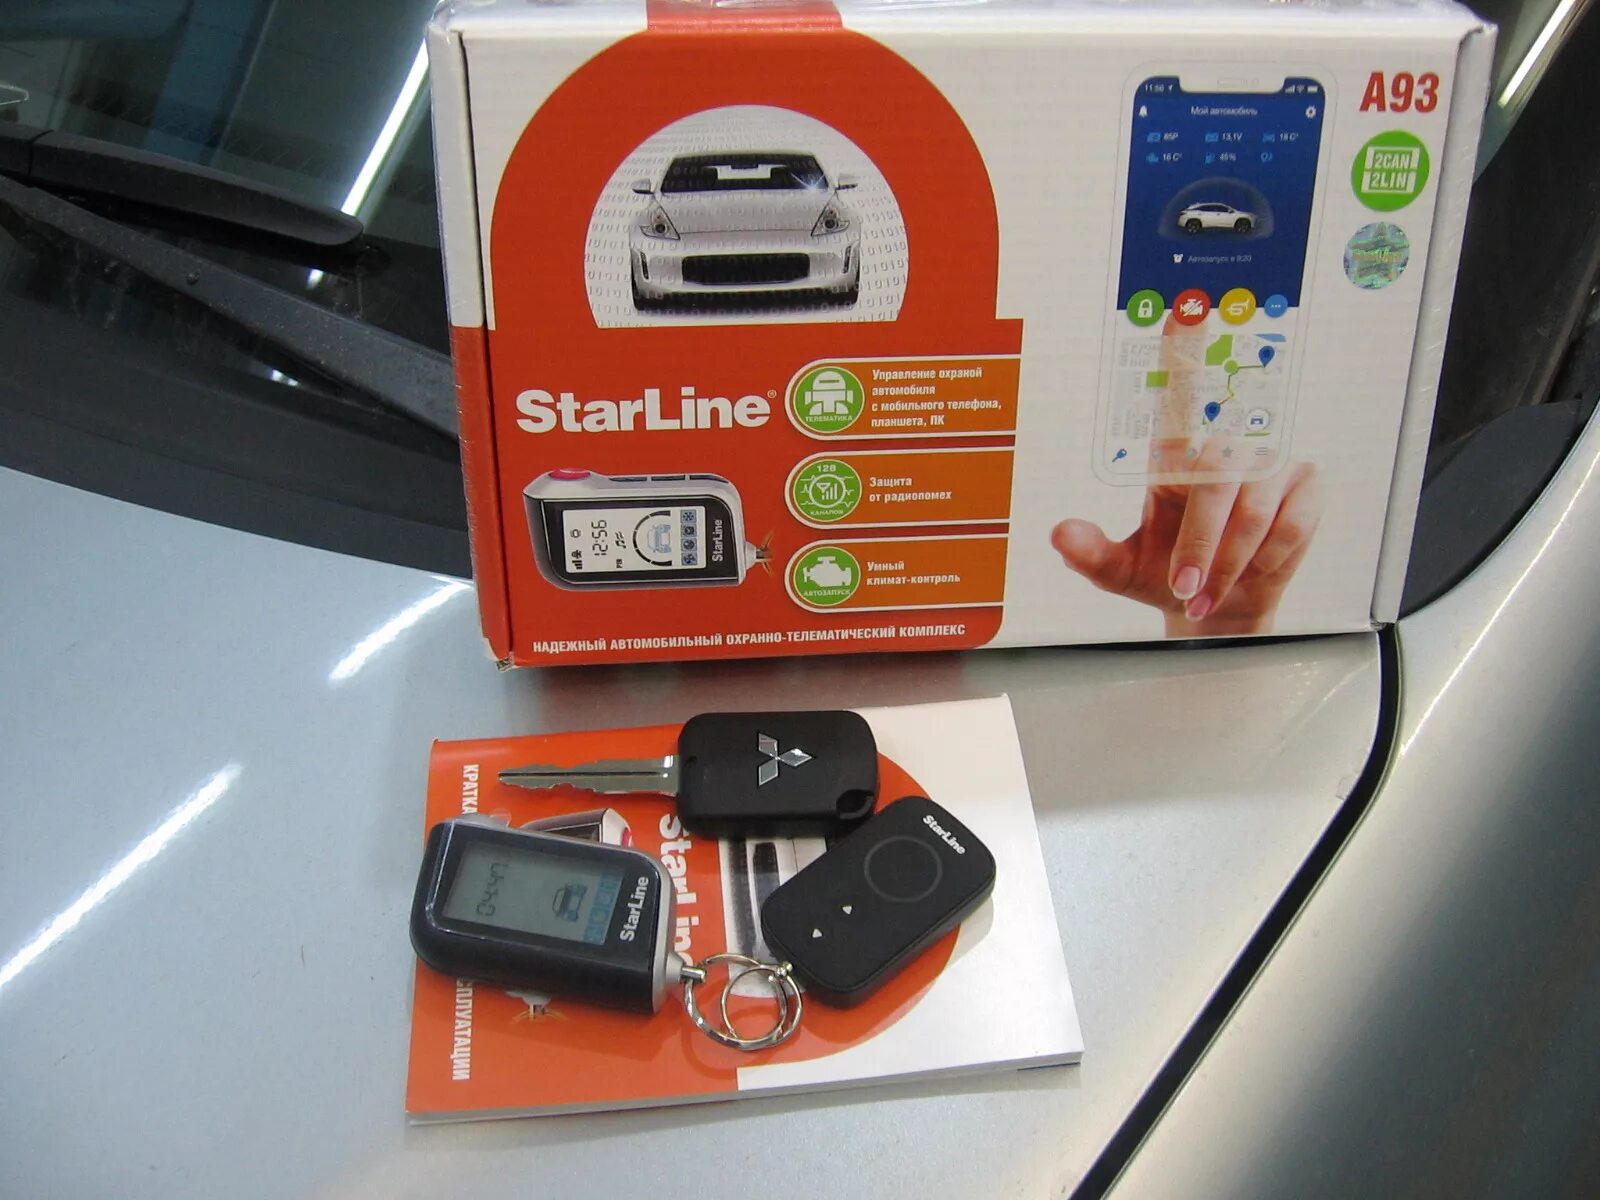 A93 2can 2lin gsm. STARLINE a39. Старлайн а93 v2. STARLINE a93 2can+2lin. STARLINE a93 v1.